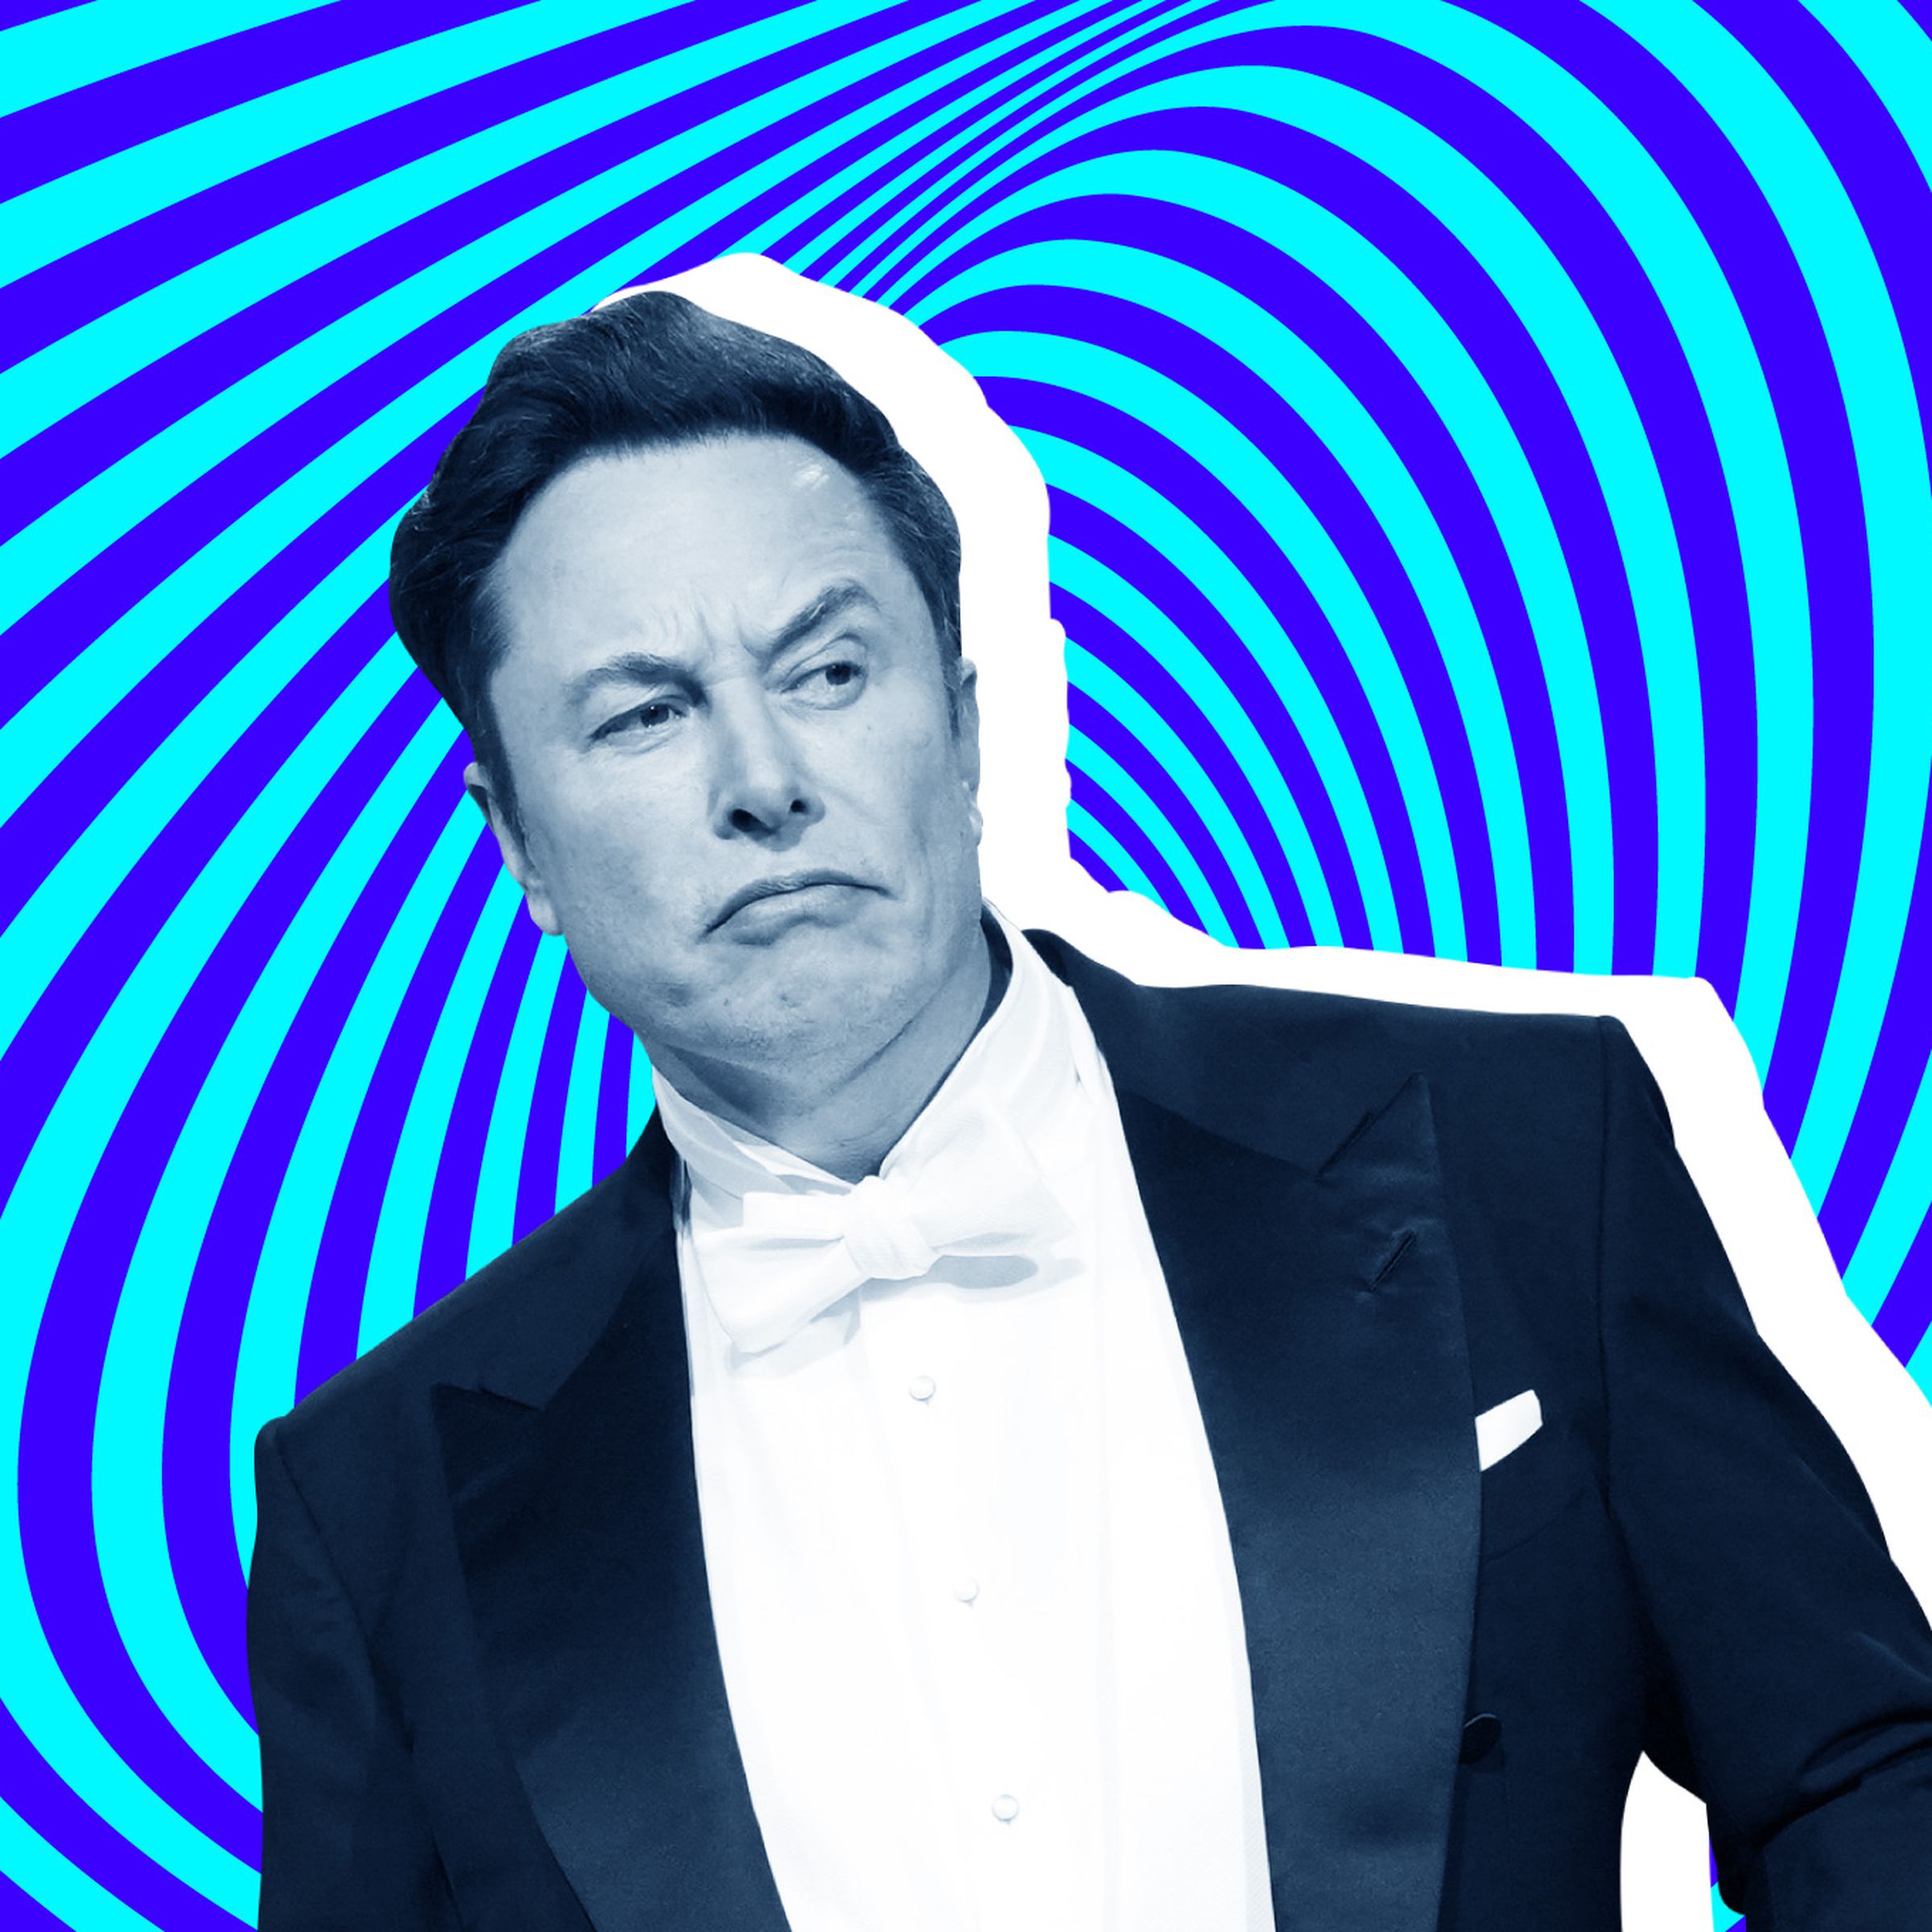 An image of Elon Musk on a blue illustrated background.